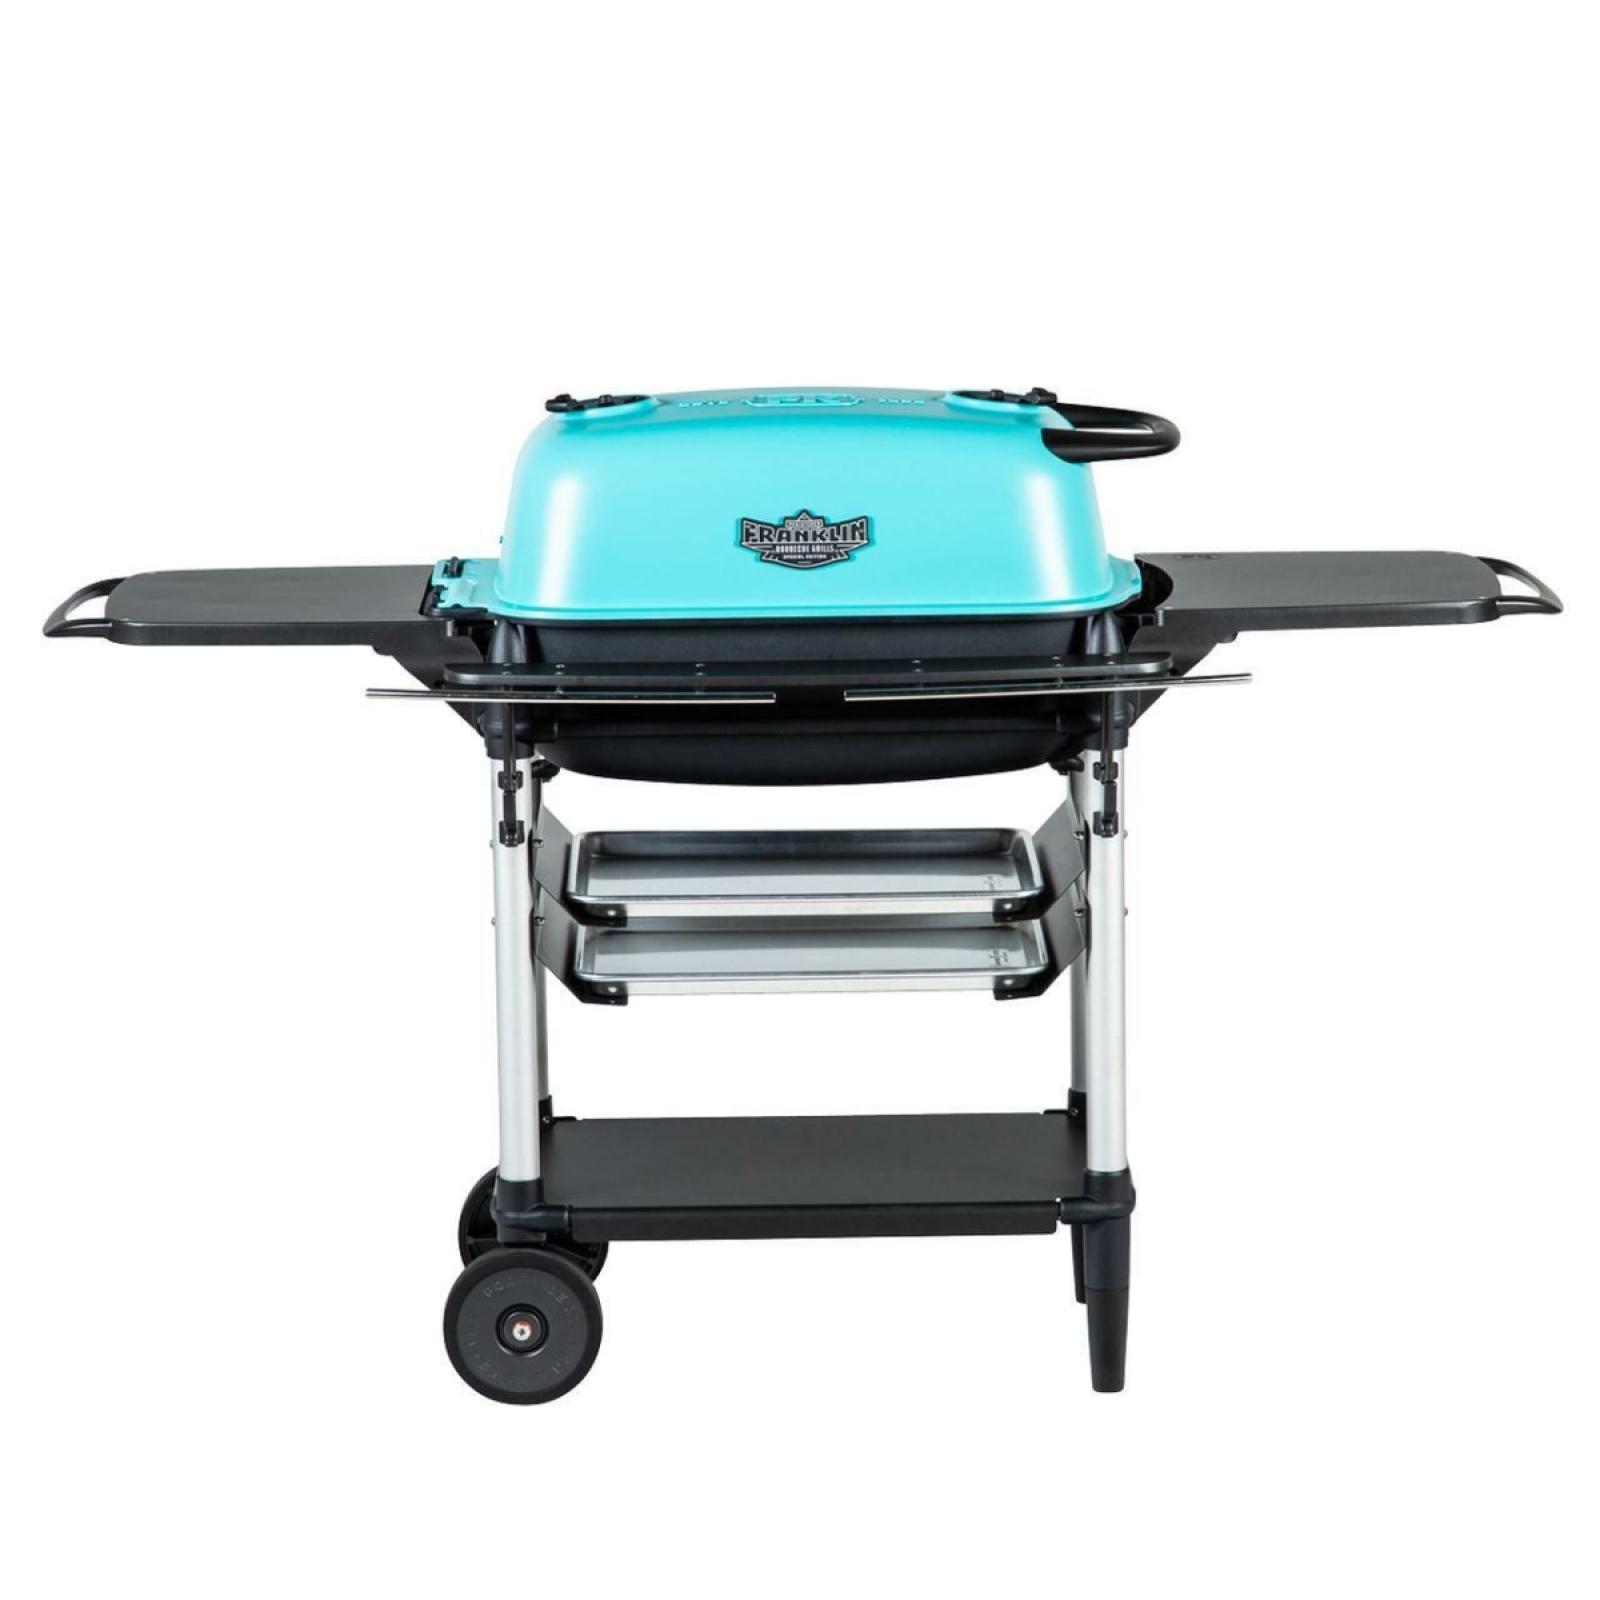 NEW - PK Grills PK300 Aaron Franklin Portable Charcoal Grill in Blue Teal